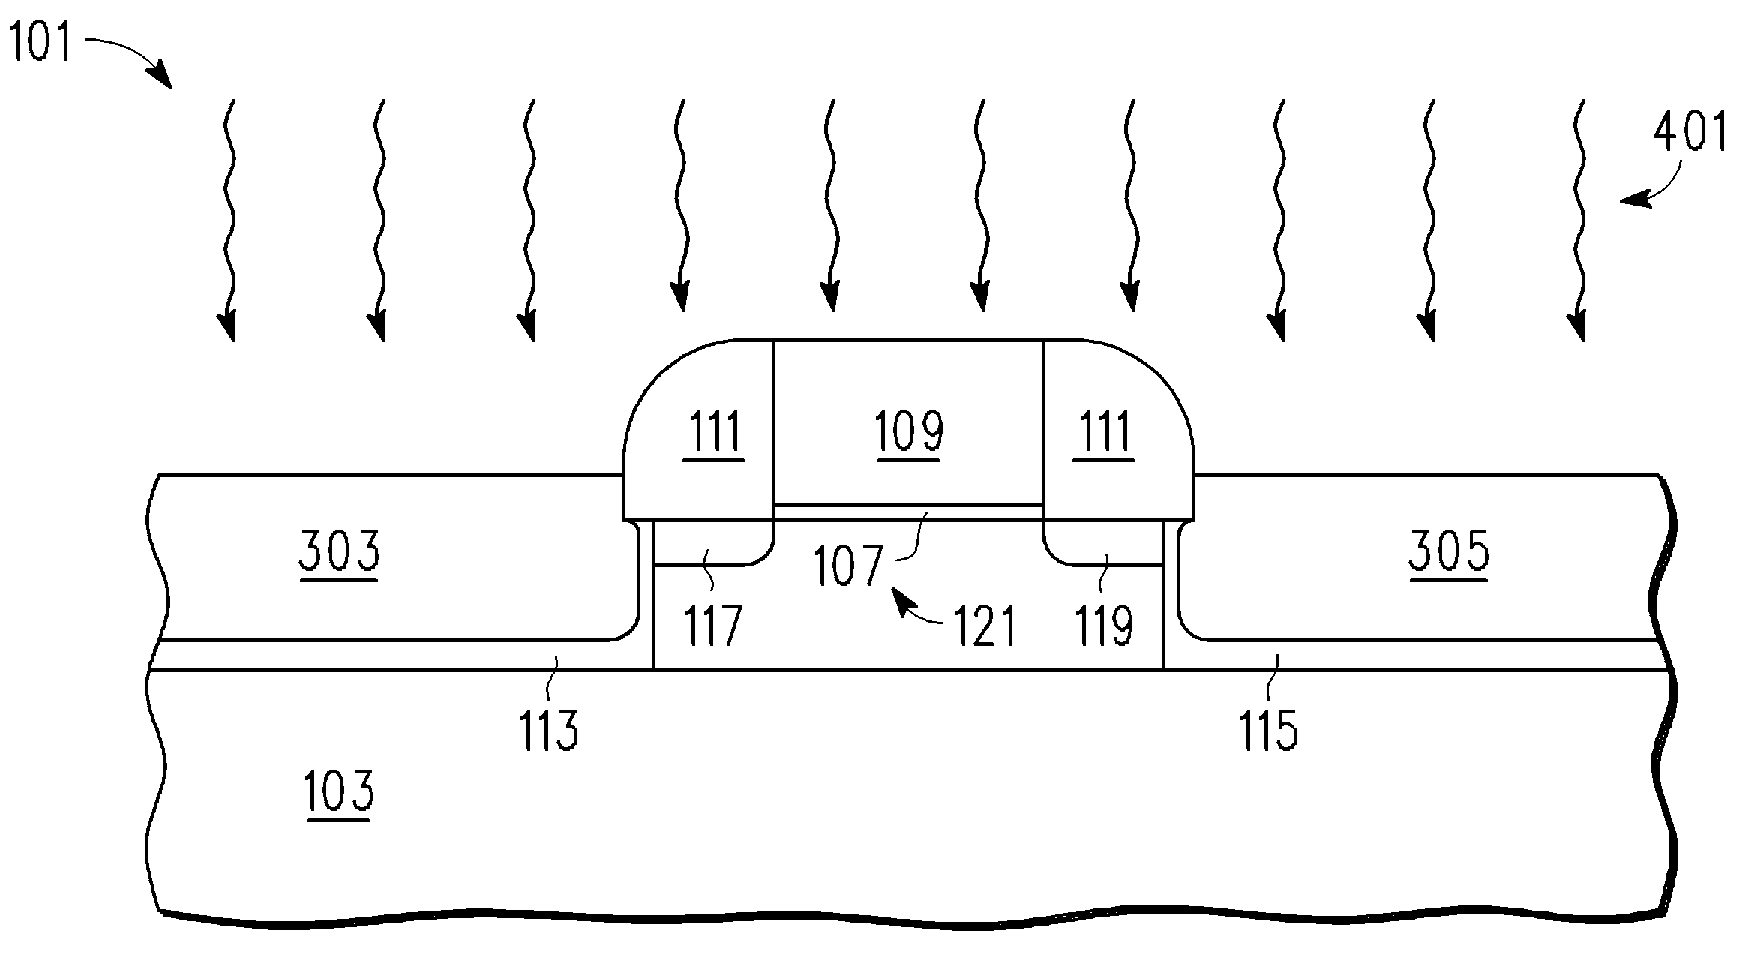 Anneal of epitaxial layer in a semiconductor device